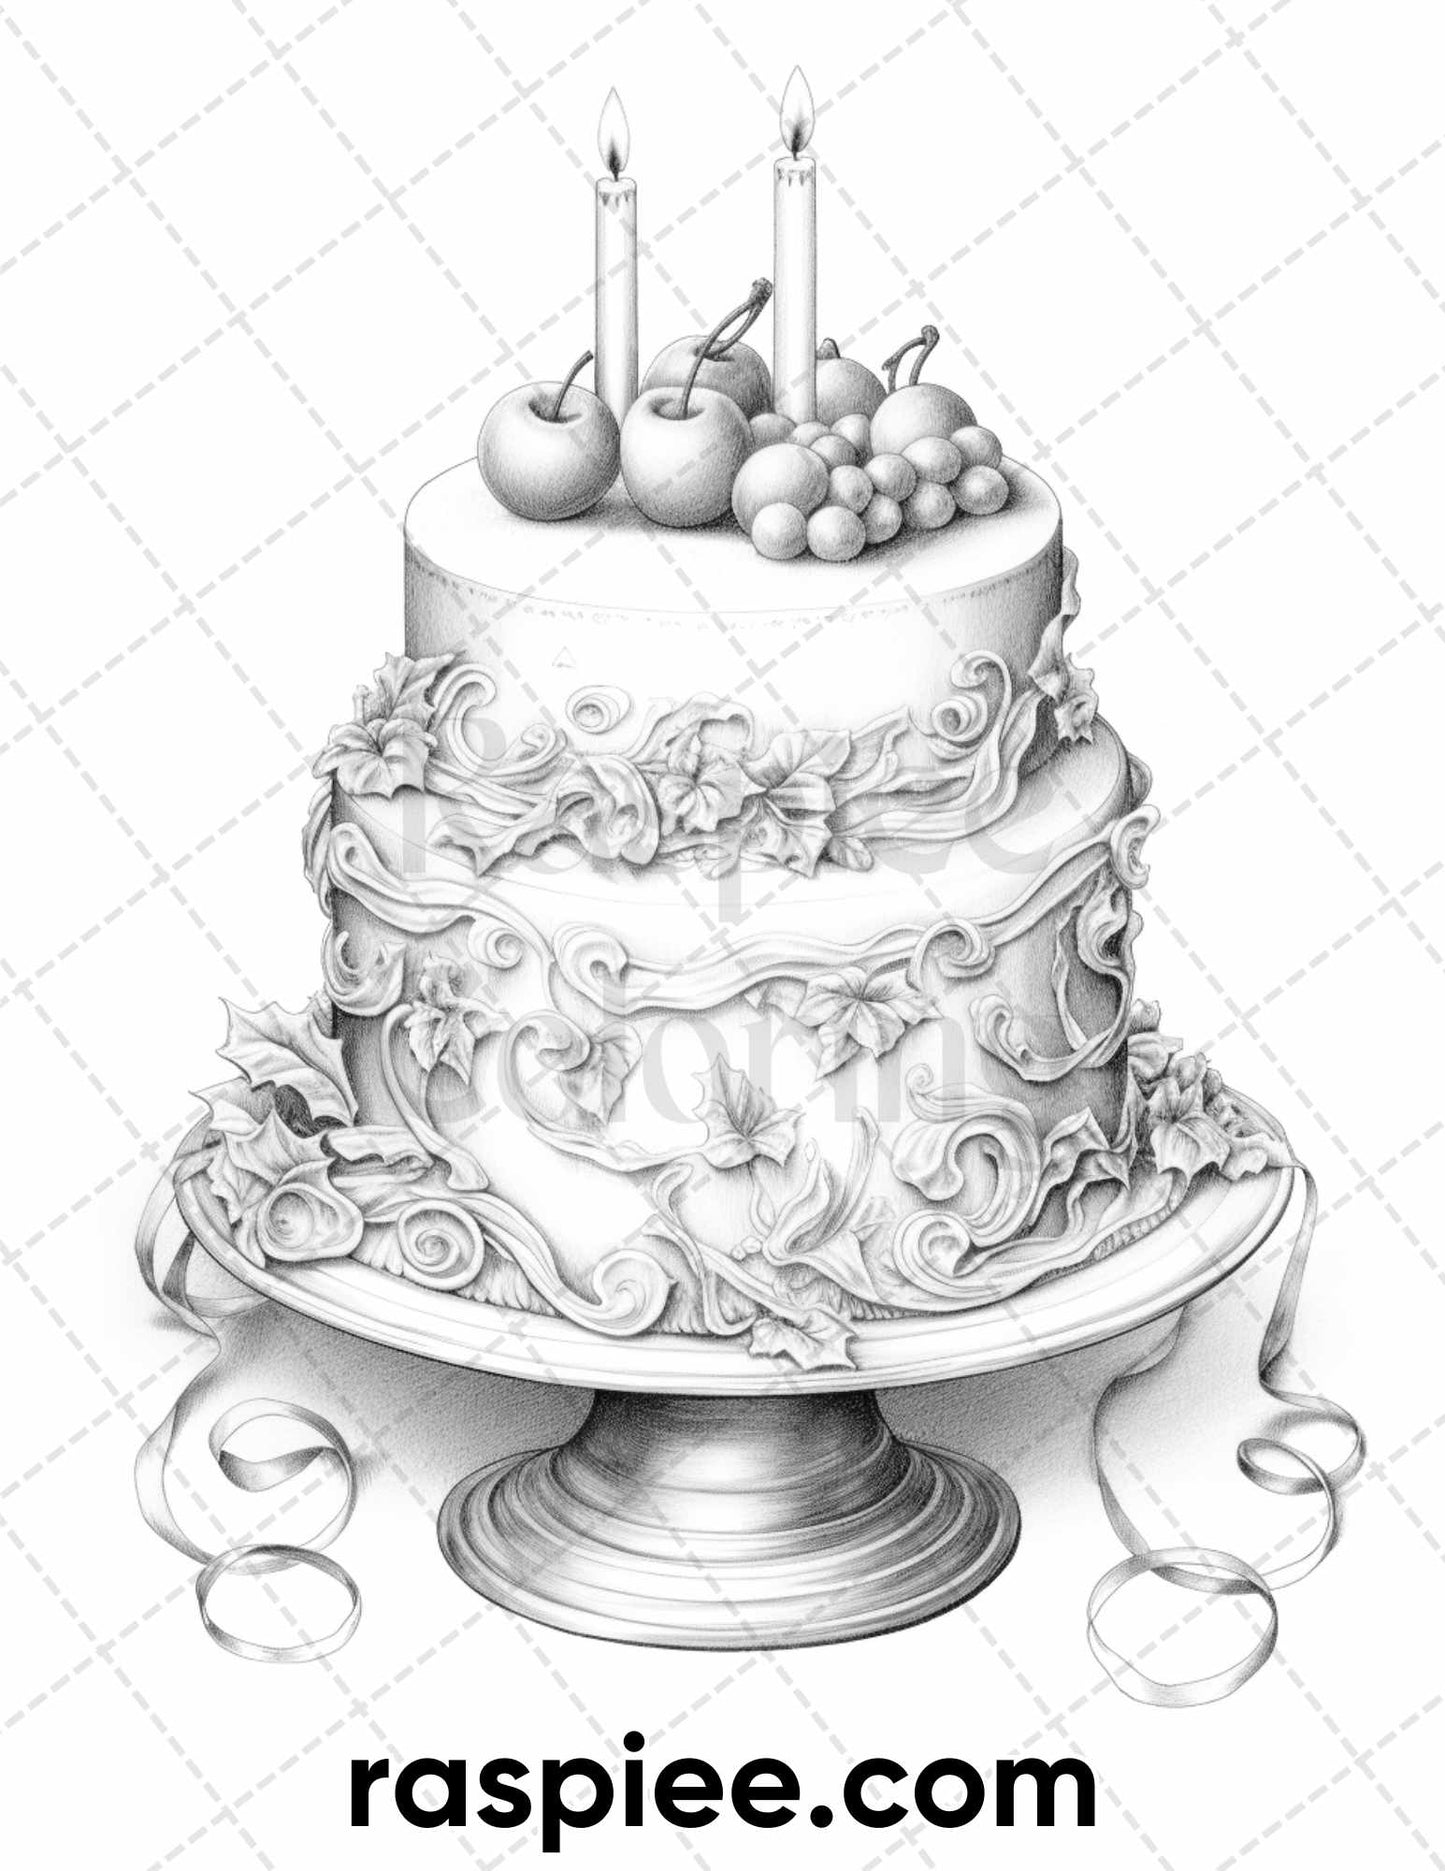 Christmas Cake Coloring Page, Grayscale Adult Coloring, Xmas Cake Coloring pages, Christmas Coloring Pages for Adults, Xmas Coloring Pages, Holiday Coloring Pages, Grayscale Coloring Sheets, Relaxing Coloring Activity, Adult Coloring Book Printable, Holiday Coloring Fun, Winter Dessert Coloring, stress relief coloring pages